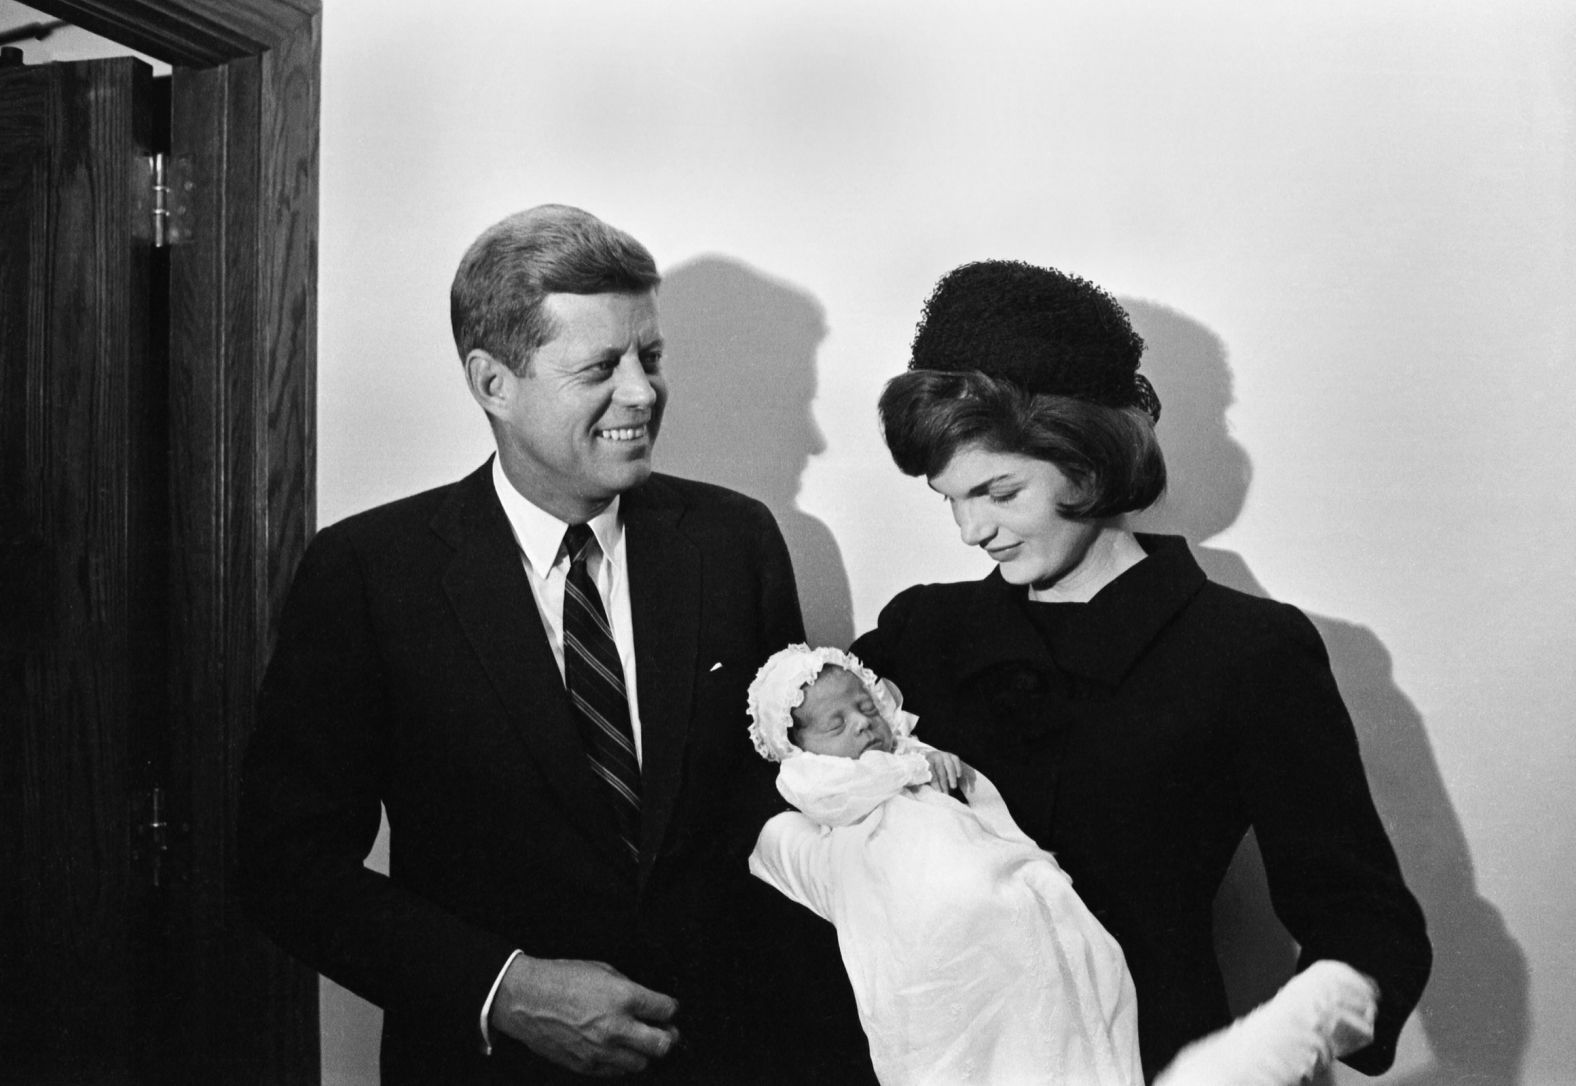 Kennedy stands with his wife, Jacqueline, and his newborn son, John Jr., during the baby's christening in December 1960.